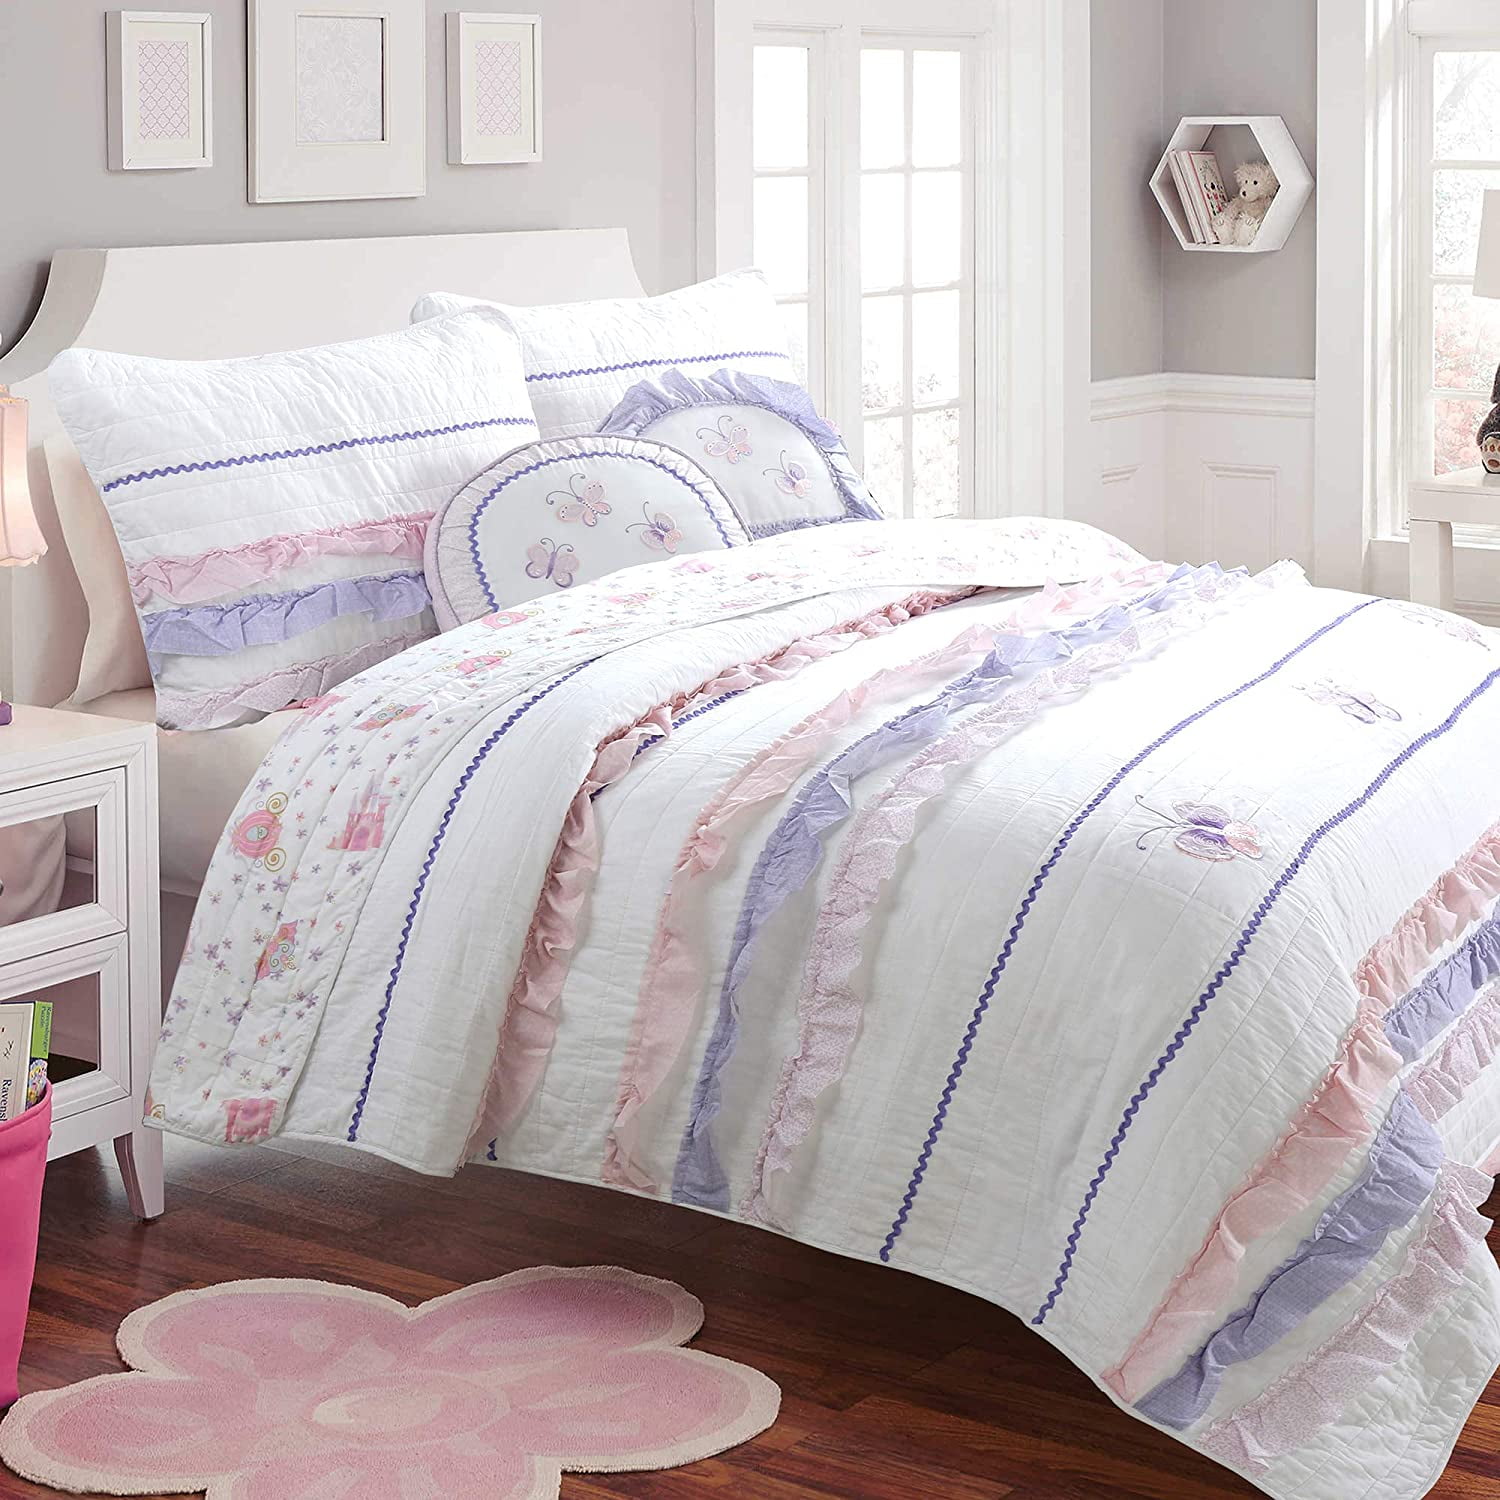 Details about   Pink Blue Purple White Floral 3 pc Quilt Set Coverlet Full Queen King Bedding 